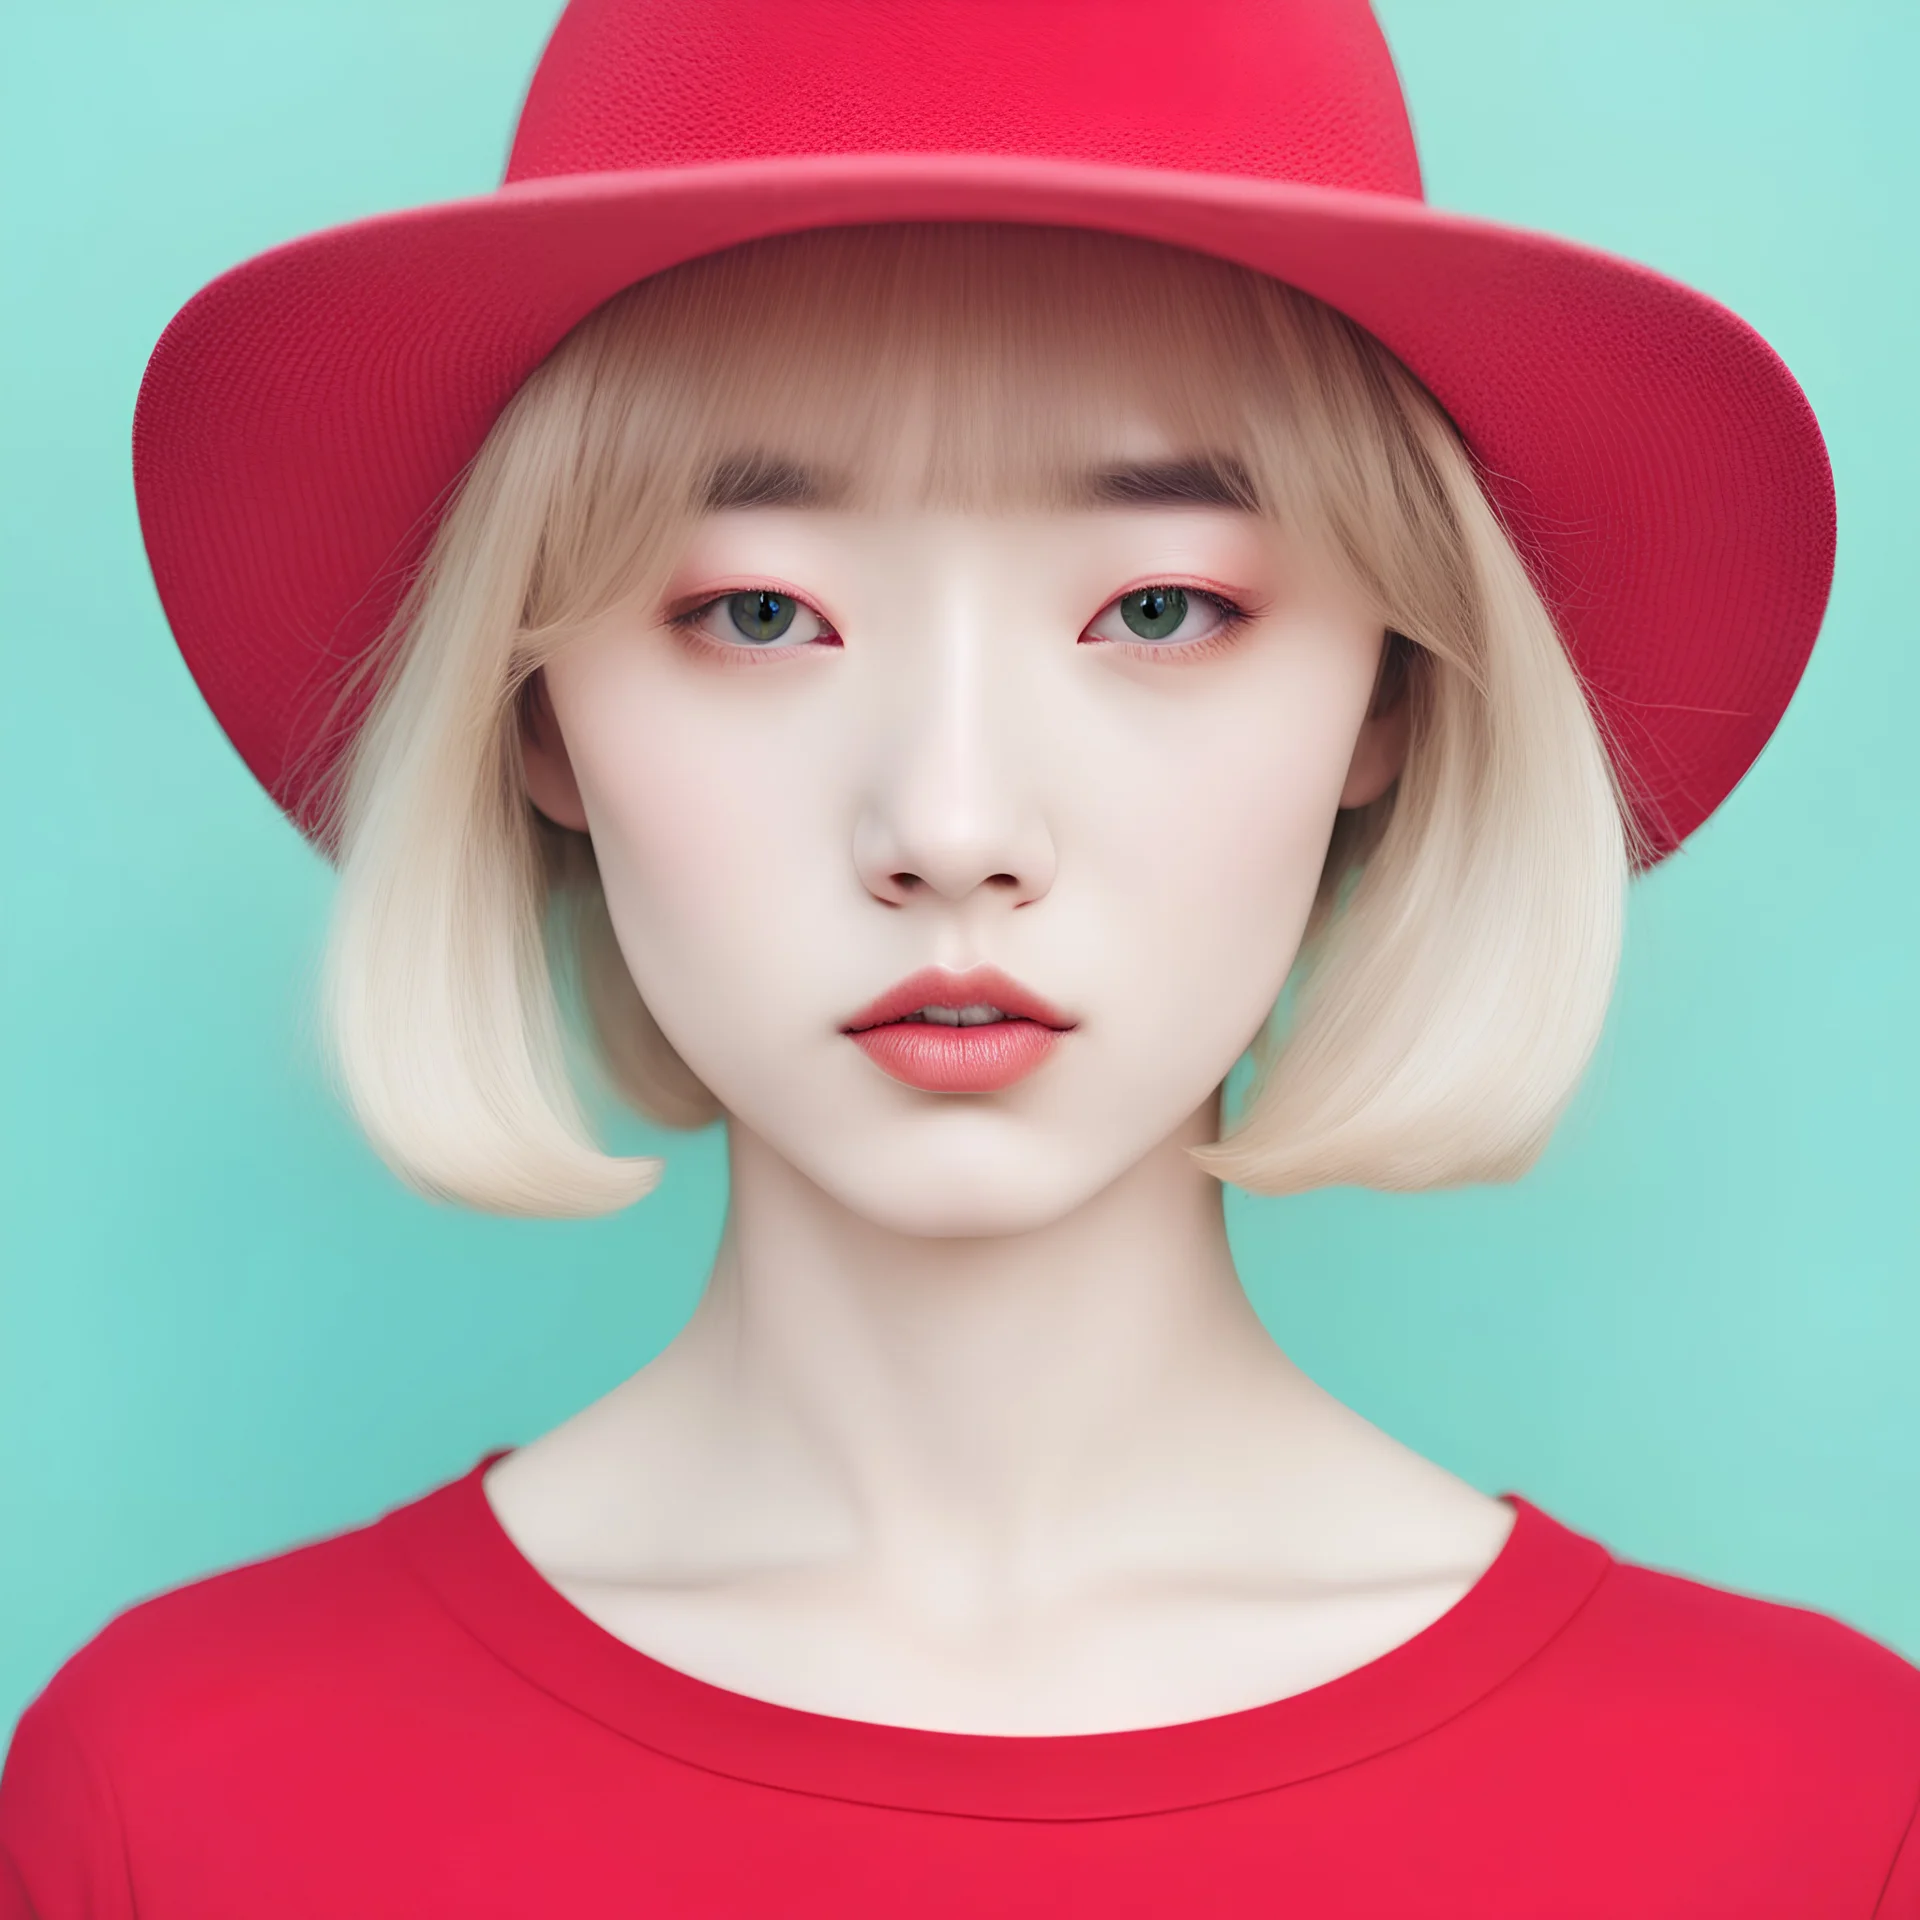 a close up of a person wearing a hat, by Ren Hang, aya takano color style, portrait a woman like reol, prominent rosy cheek bones, dressed in a [ [ 1 2 th century, luxury journal cover, a blond, viridian and venetian red, youth, twitter pfp, 19-year-old girl